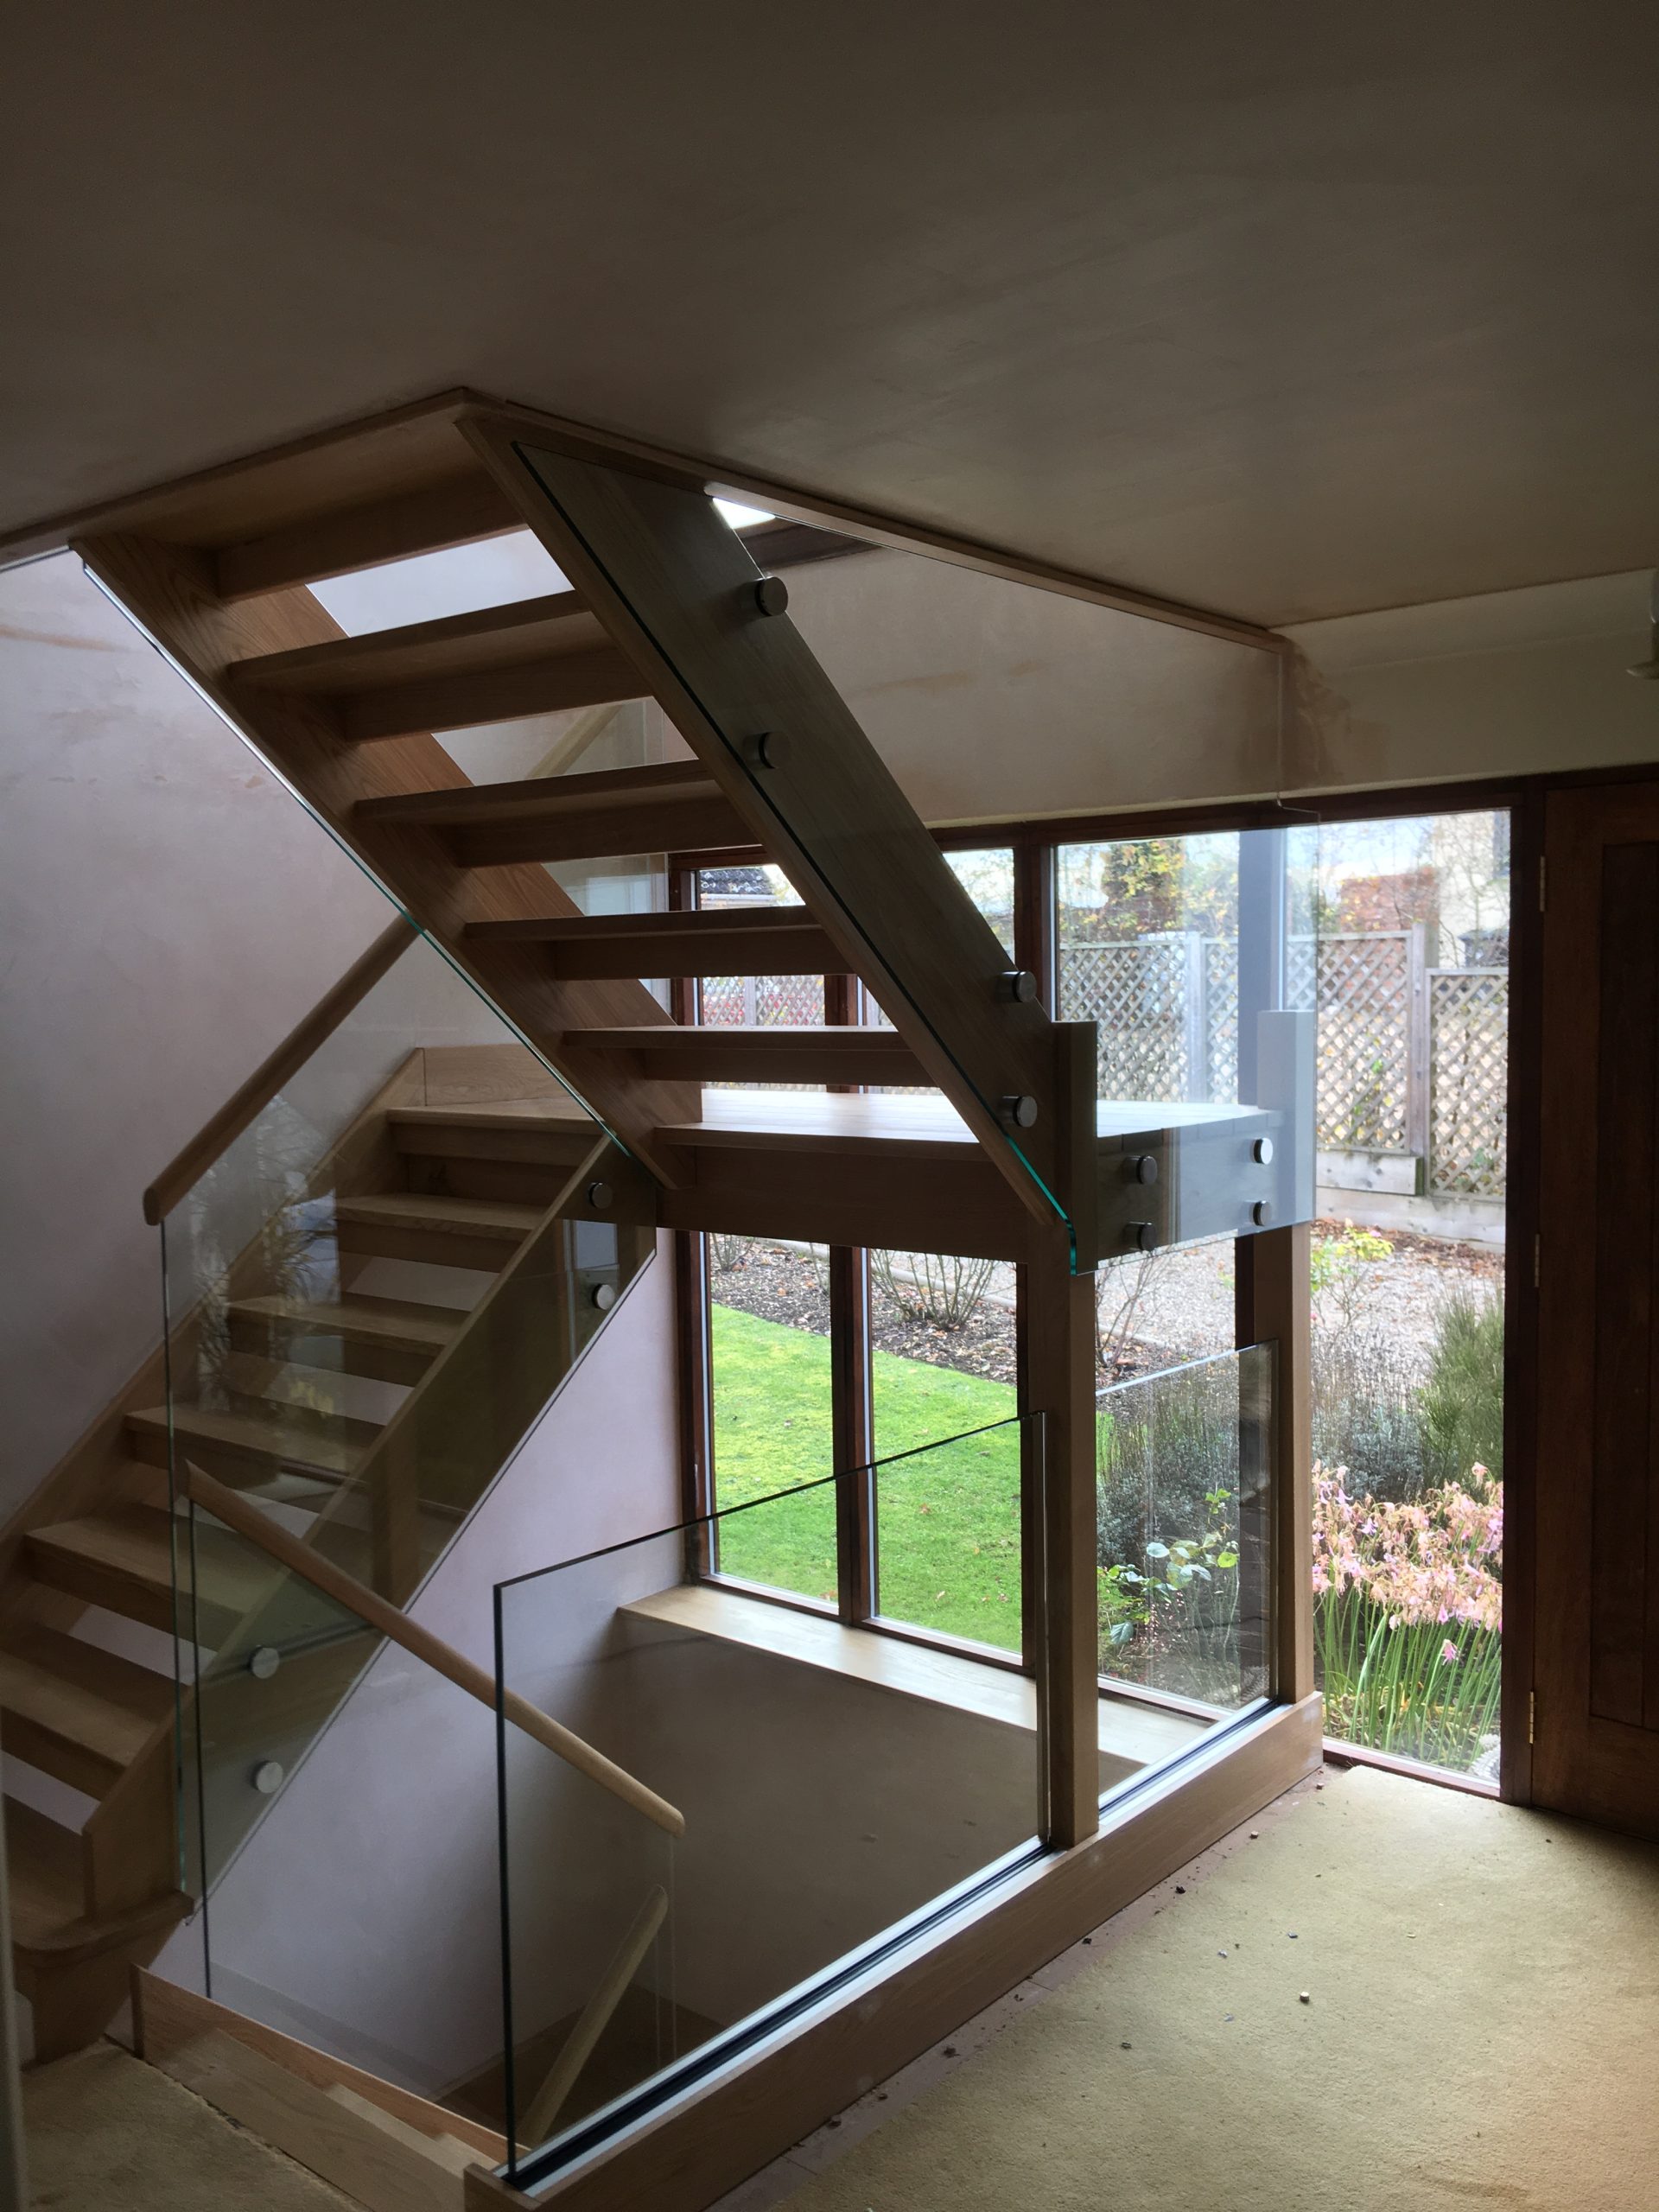 New Staircase With Glass Bannisters